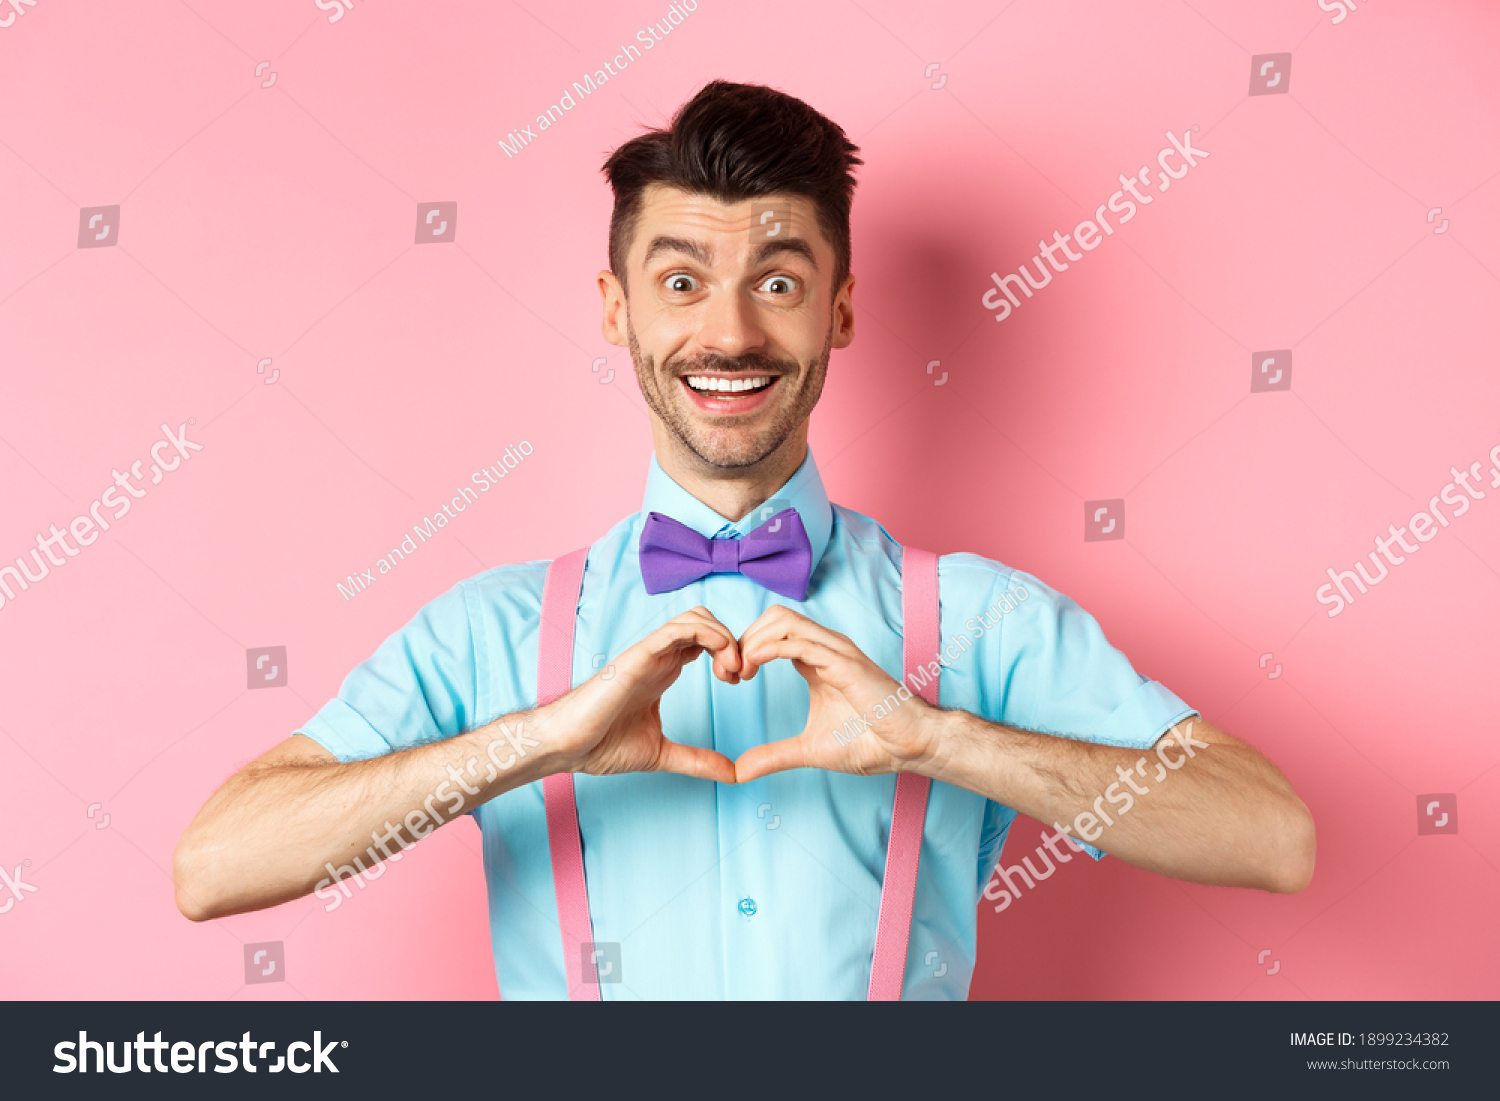 138,320 Funny man in love Stock Photos, Images & Photography | Shutterstock